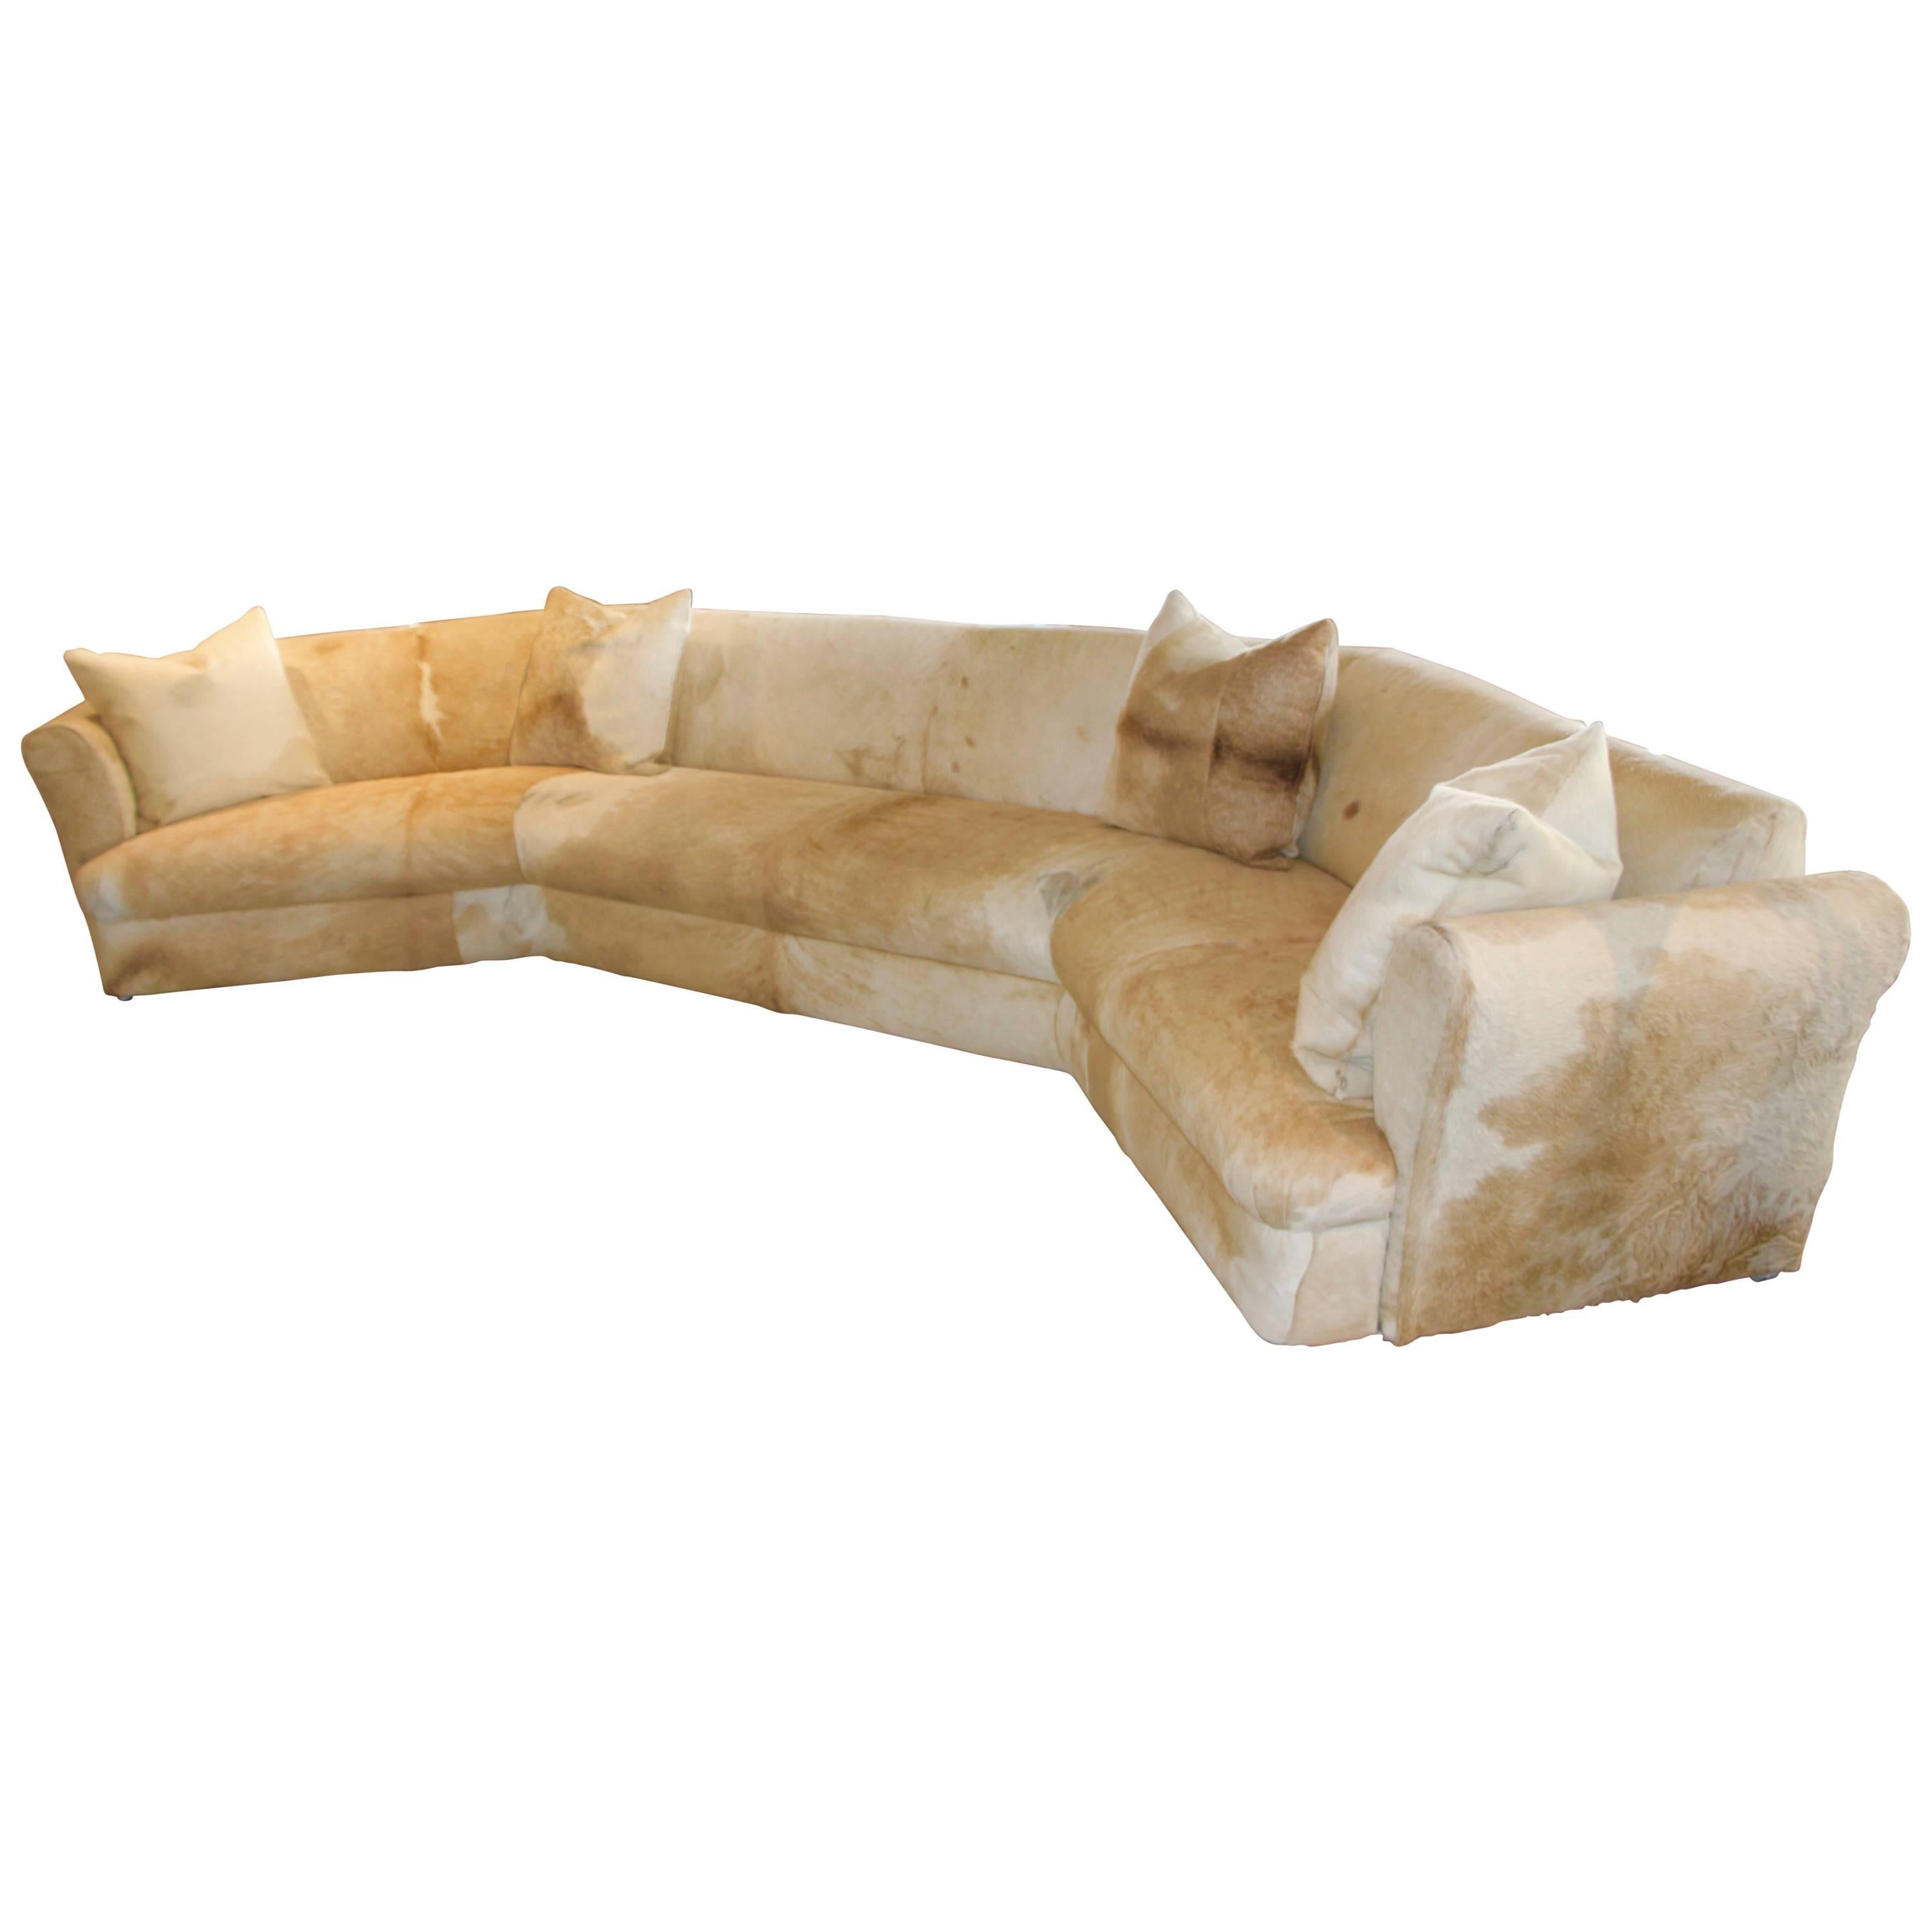 Steve Chase Attributed Cowhide Covered Curved Sofa, Pond Estate of Palm Springs